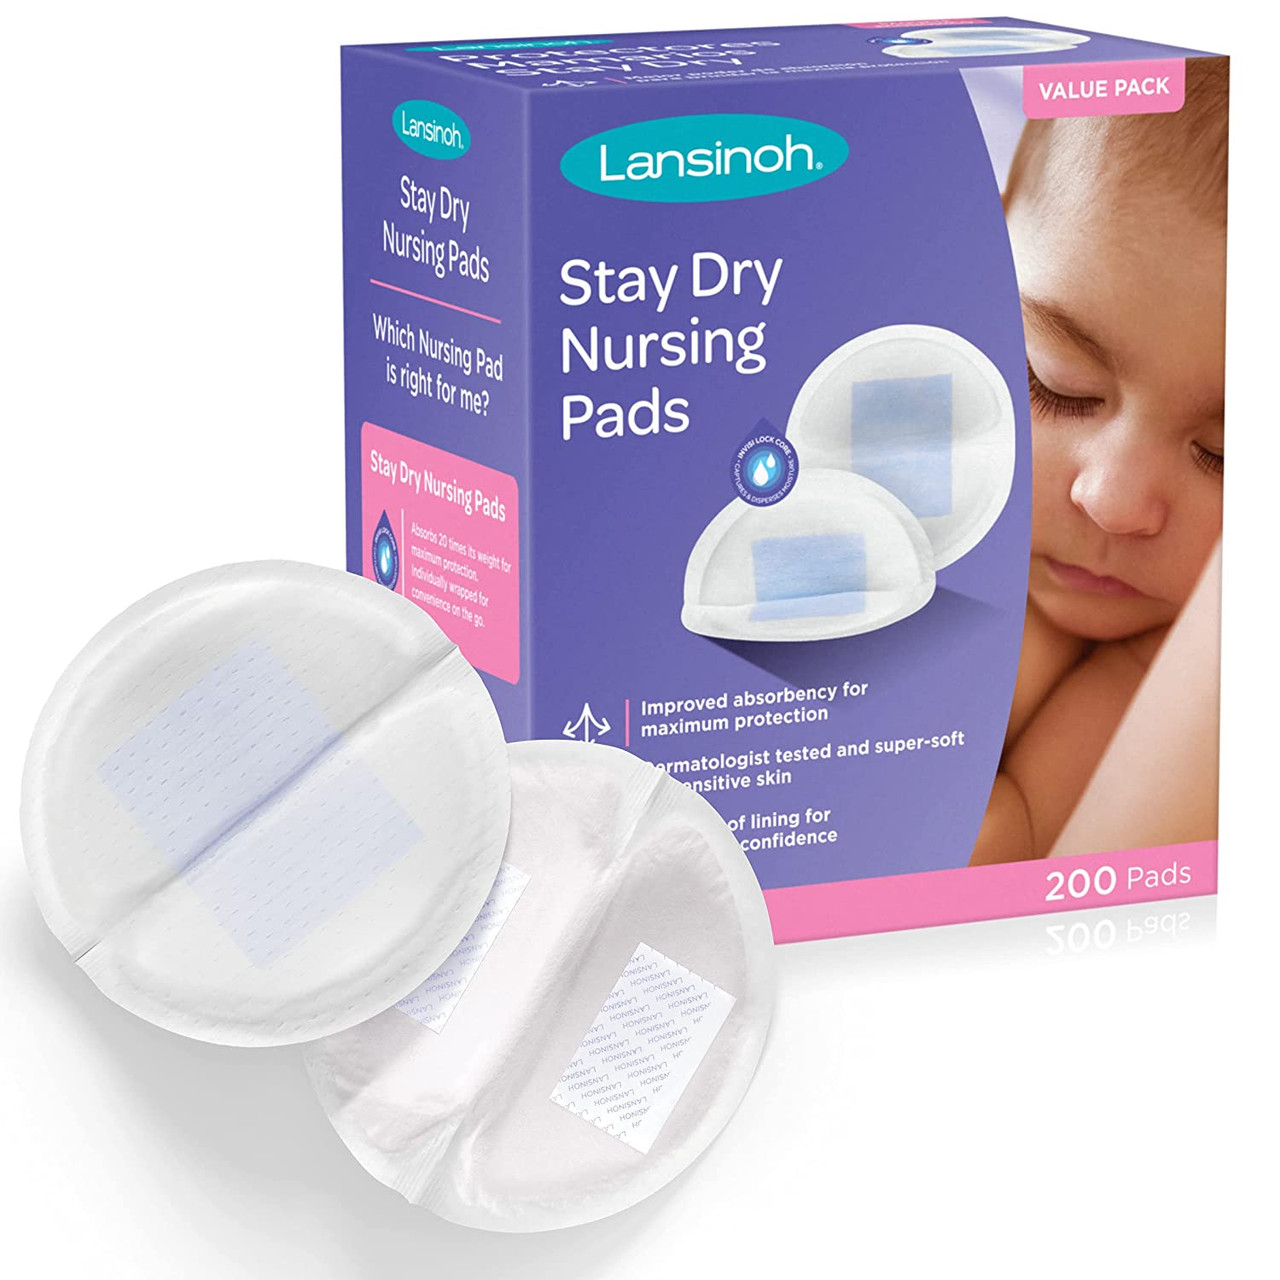 Dropship Purple Soothing Gel Pads For Breastfeeding In Section Postpartum  Essentials Kit Of 2 Pairs Pads With Covers. Reusable After Birth Warming  Lactation Massager For Nursing; Cooling; Pain Relief. to Sell Online